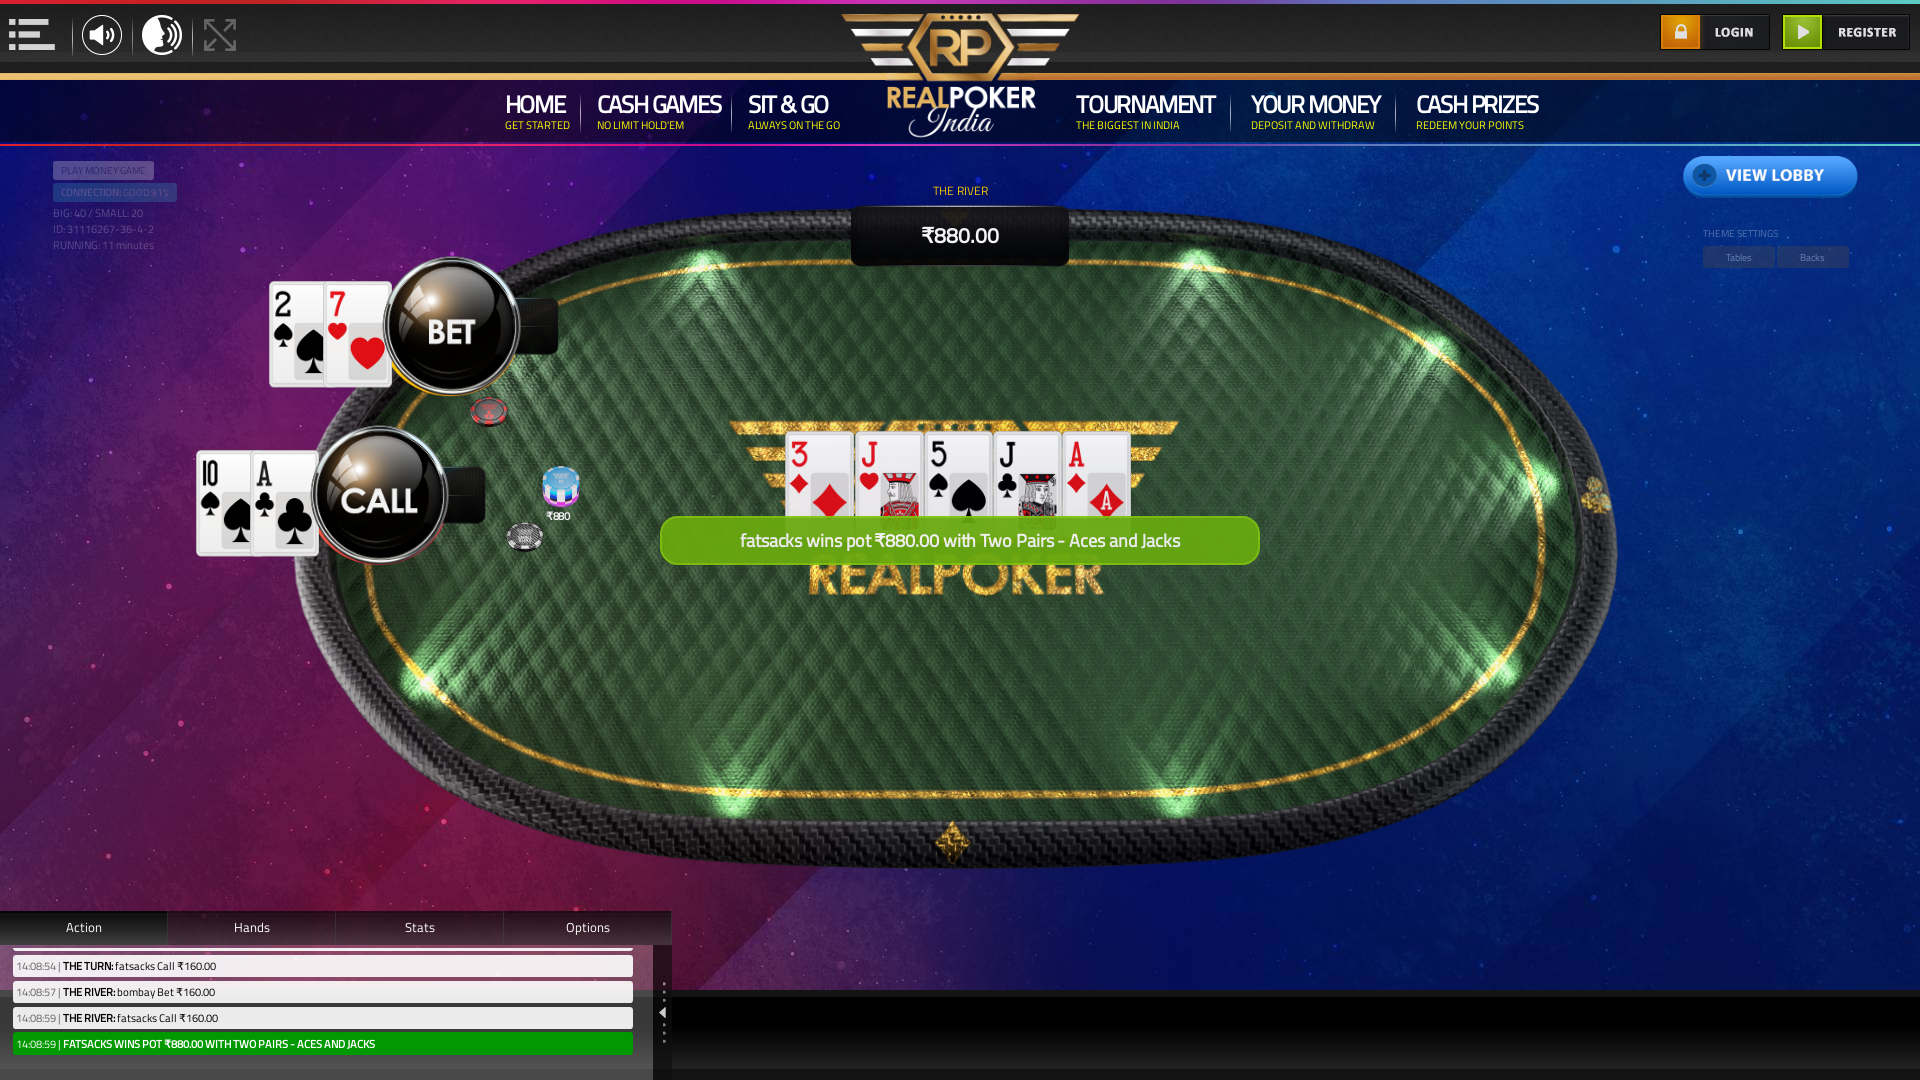 Real poker on a 10 player table in the 11th minute of the game